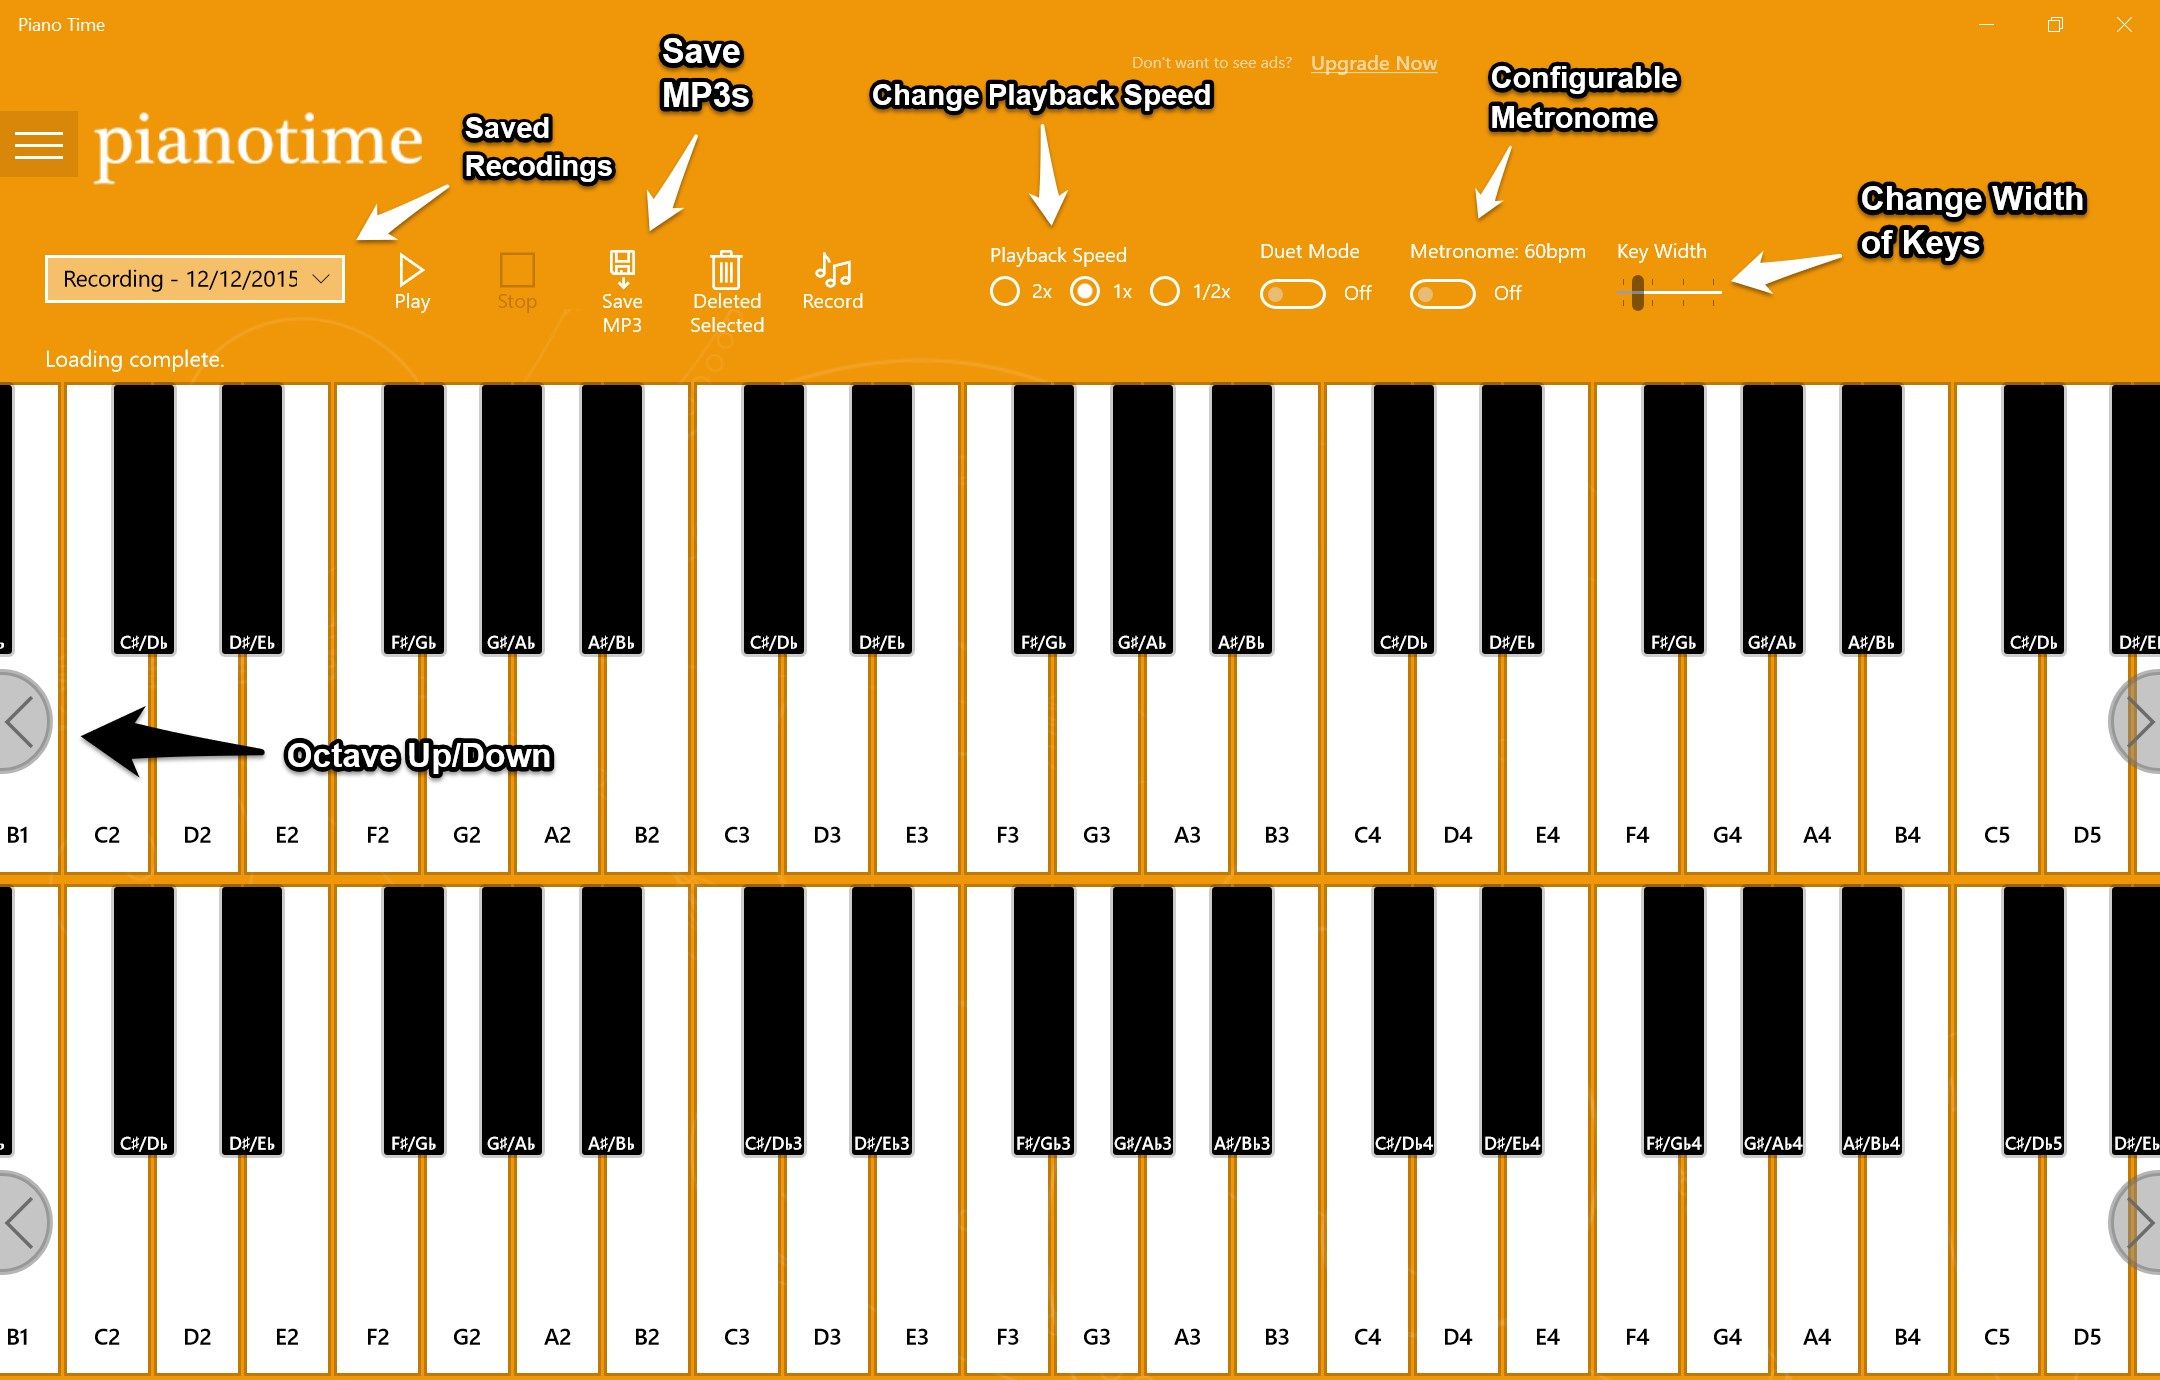 All the options you need; Save MP3s, multiple octaves, change playback speed, configurable metronome, change width of keys